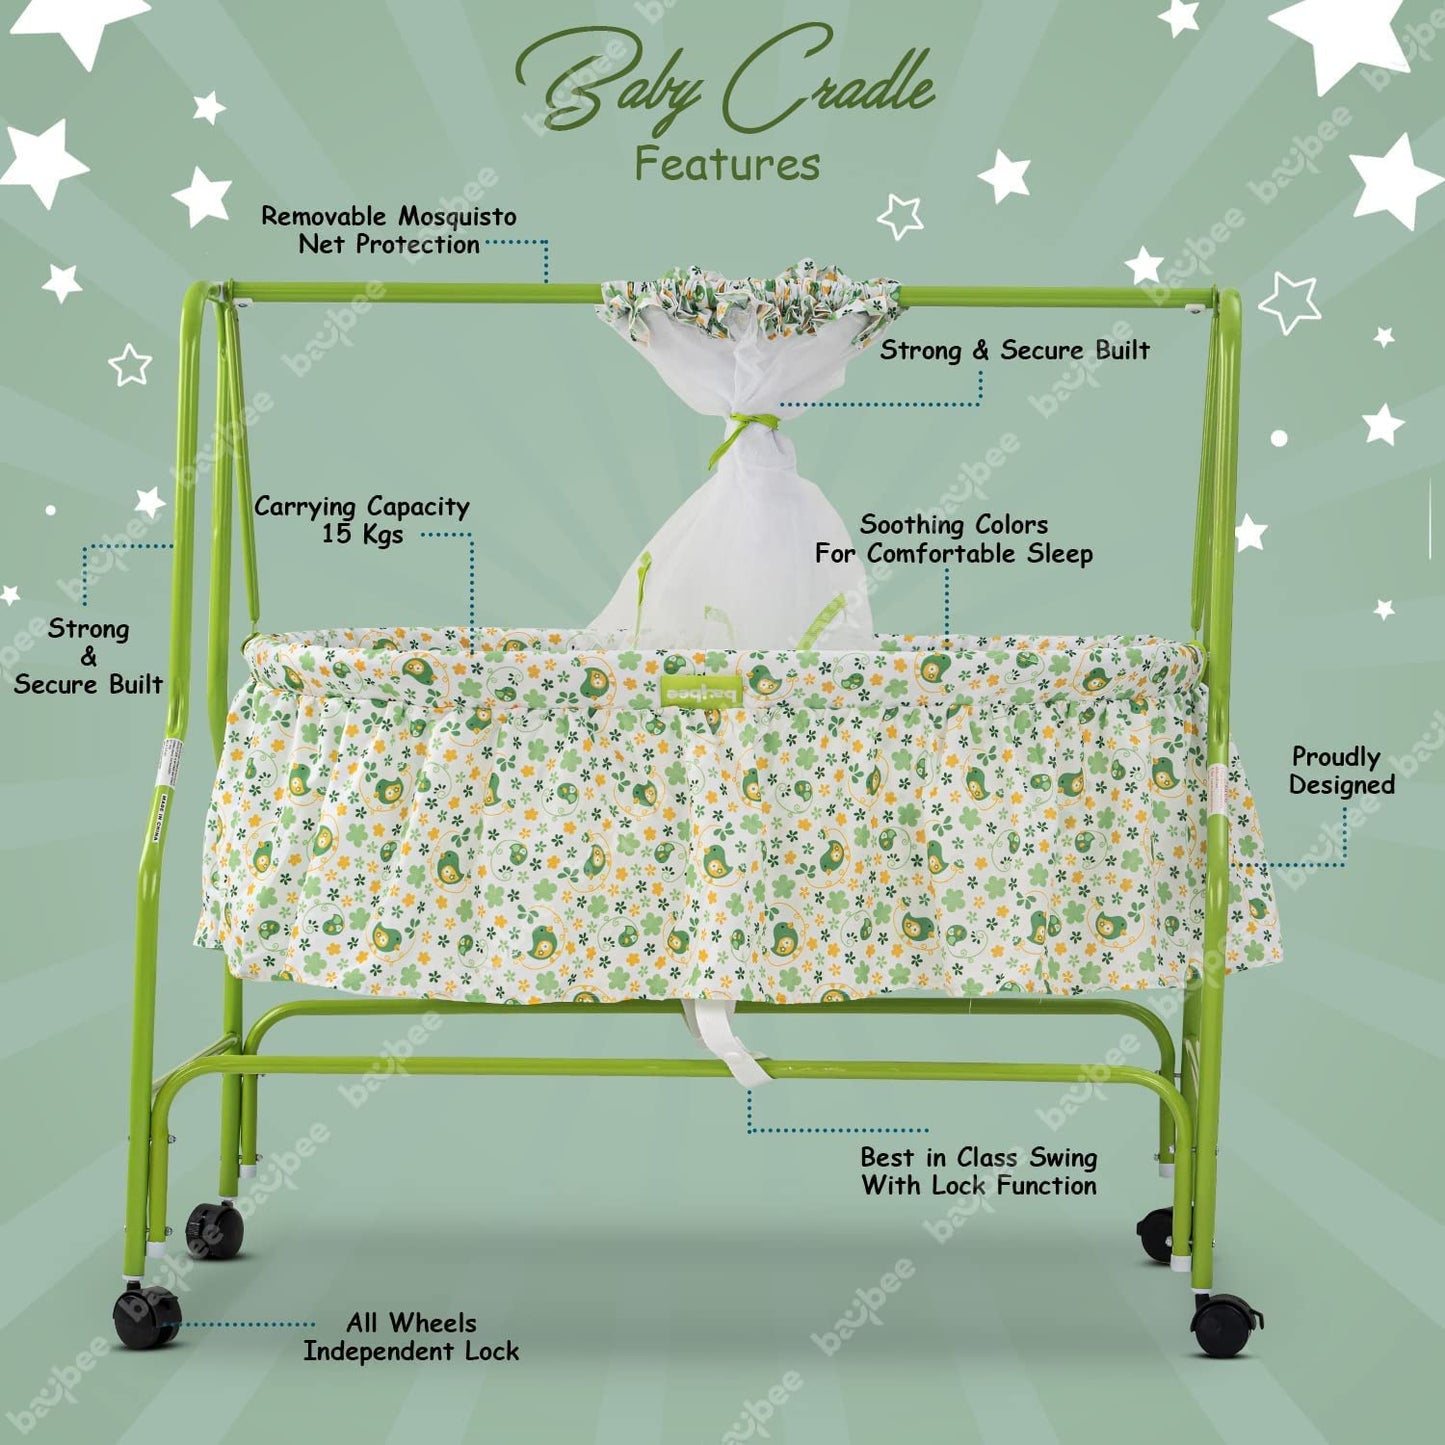 BAYBEE Enchant Baby Swing Cradle for Baby with Mosquito Net for 0 to 12 Month Boys Girls (Green)